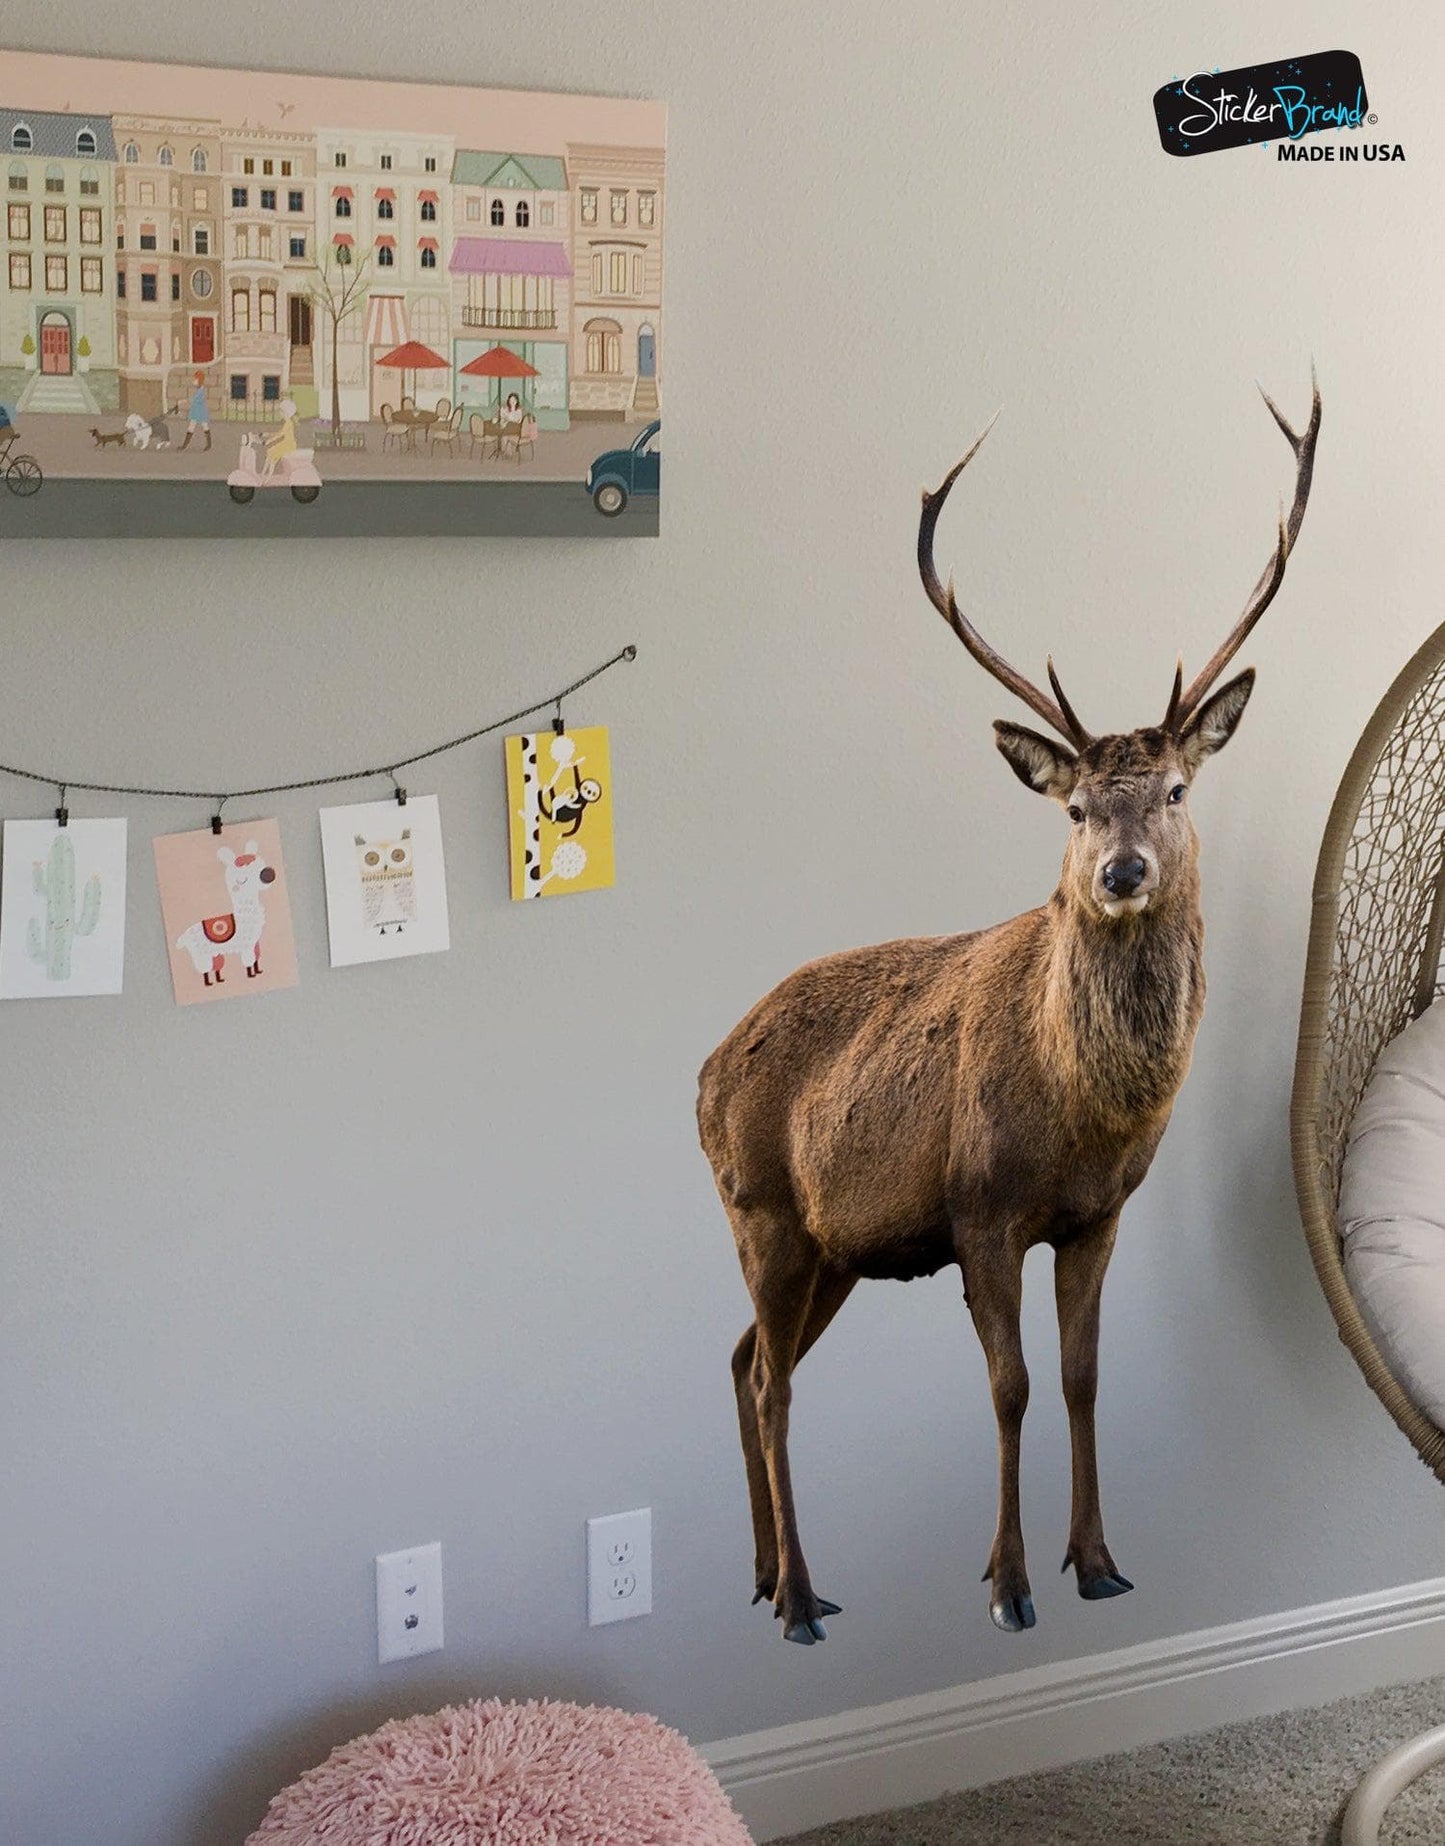 Wildlife Nature Deer Wall Decal Sticker. Posing and Staring. Large Horn Buck with Antlers. #6105